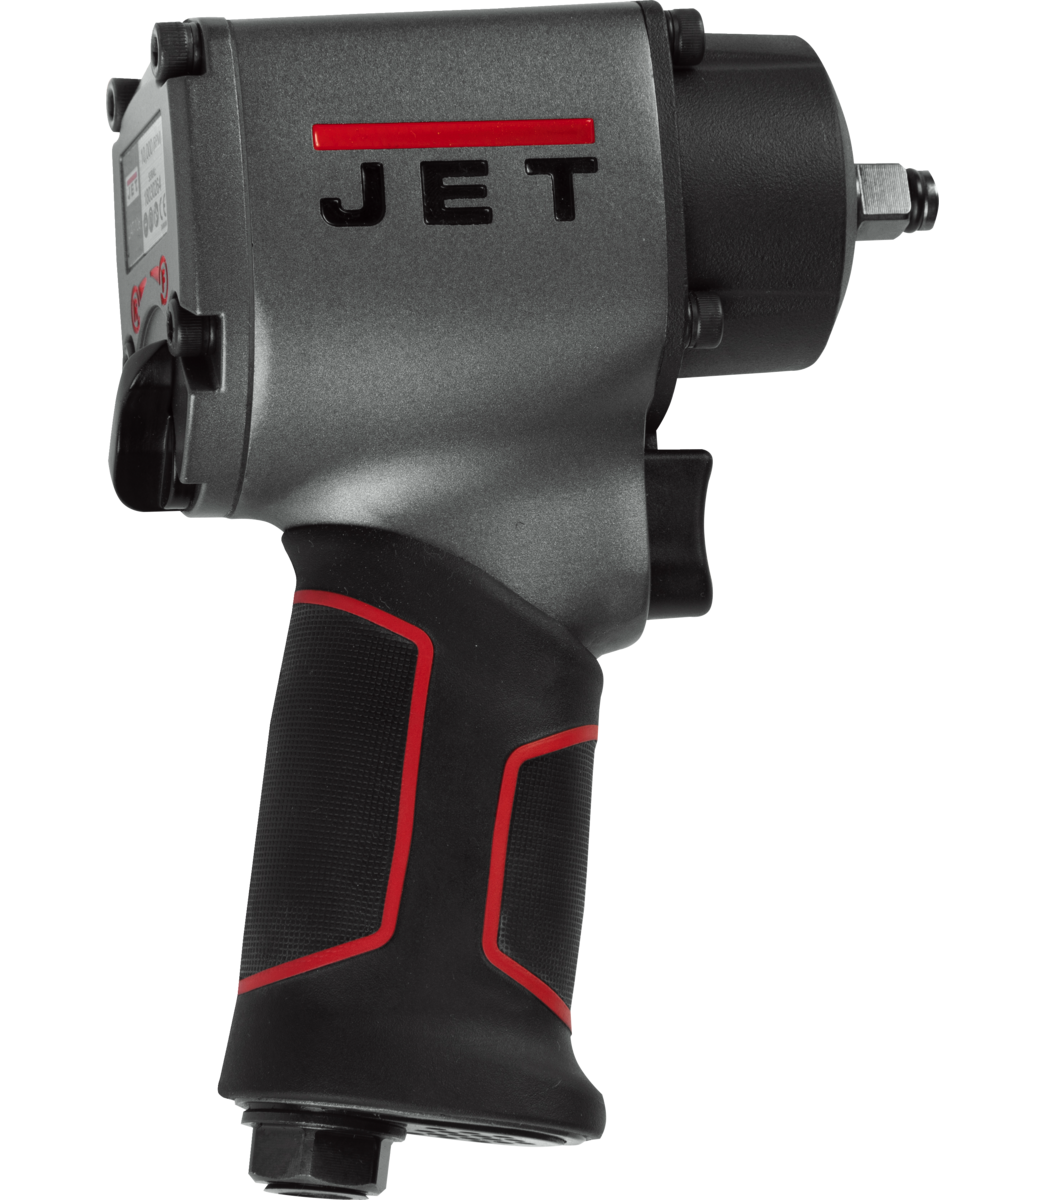 JET 3/8" Compact Impact Wrench